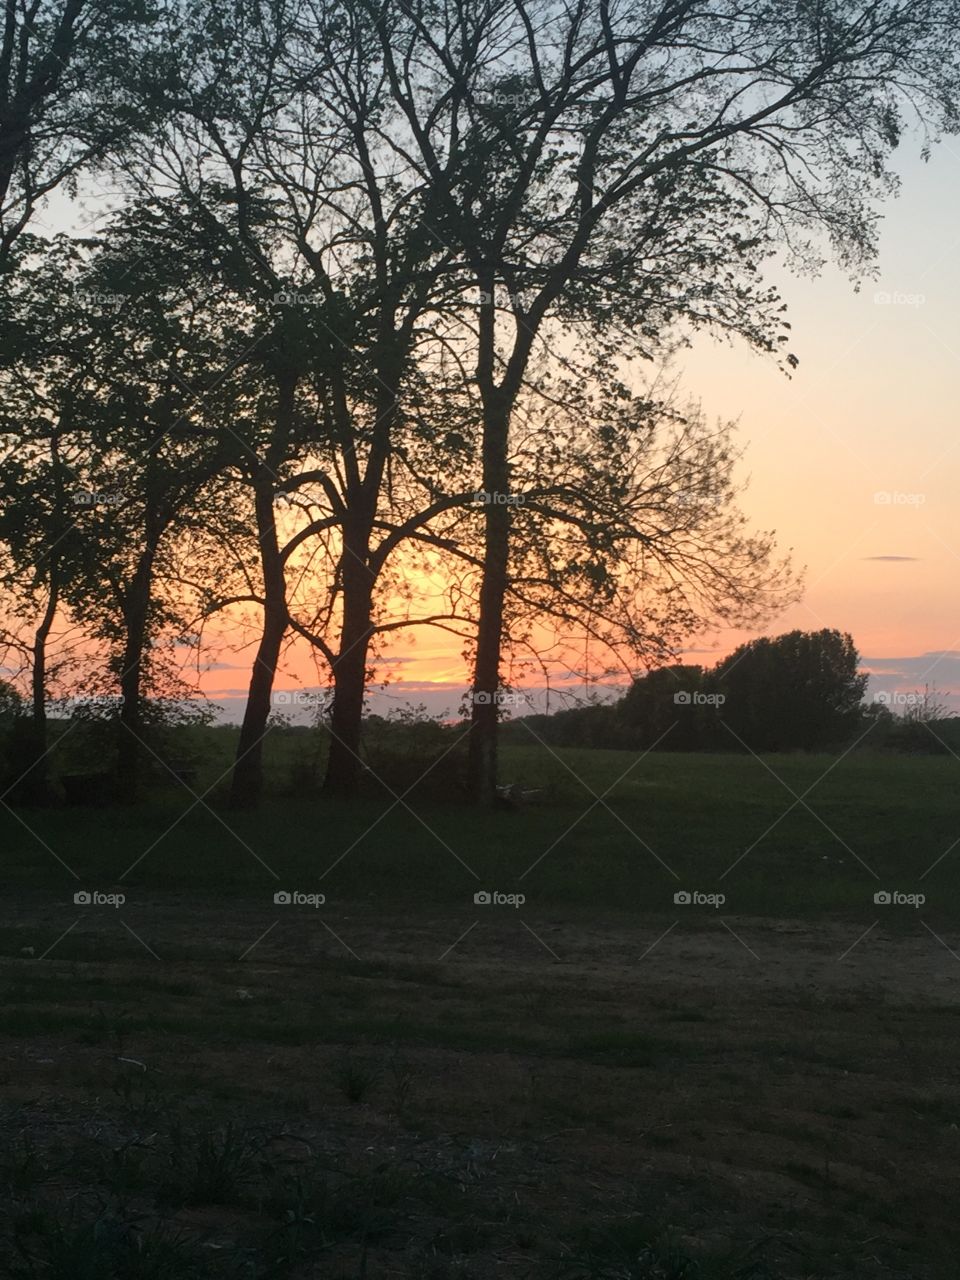 Evening in the country 